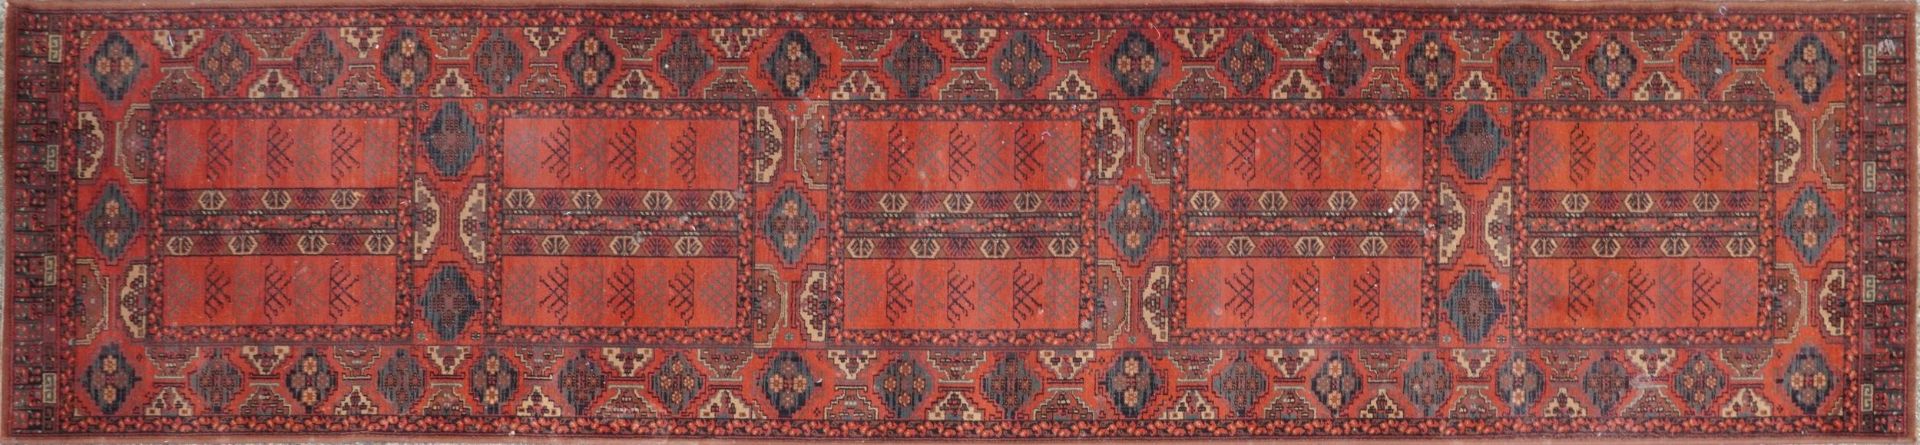 Persian red and blue ground carpet runner having an all over geometric design, 350cm x 90cm : For